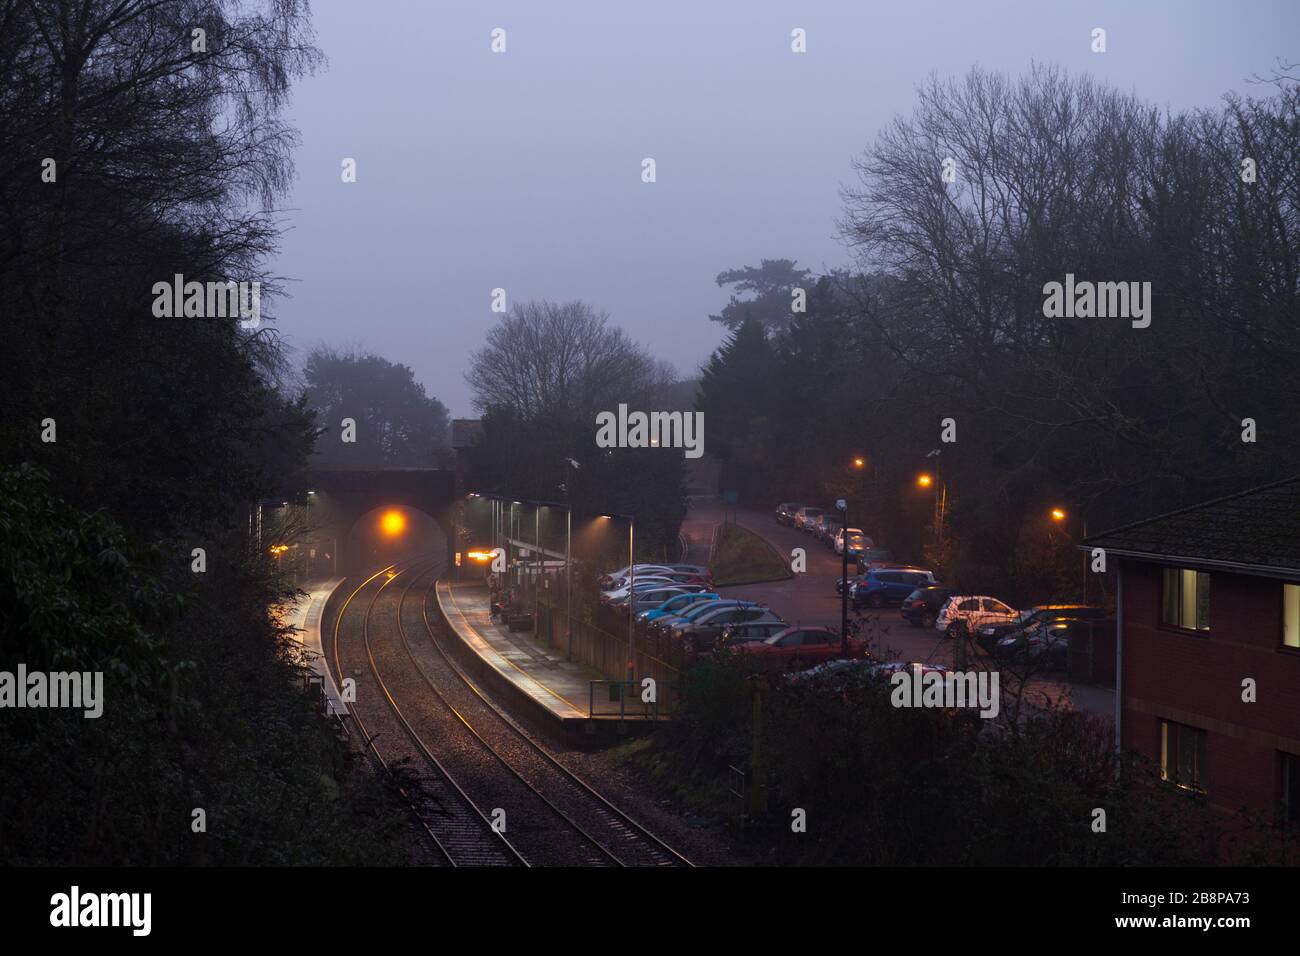 Llanishen railway station in the south Wales valleys at dusk on a damp, misty day Stock Photo